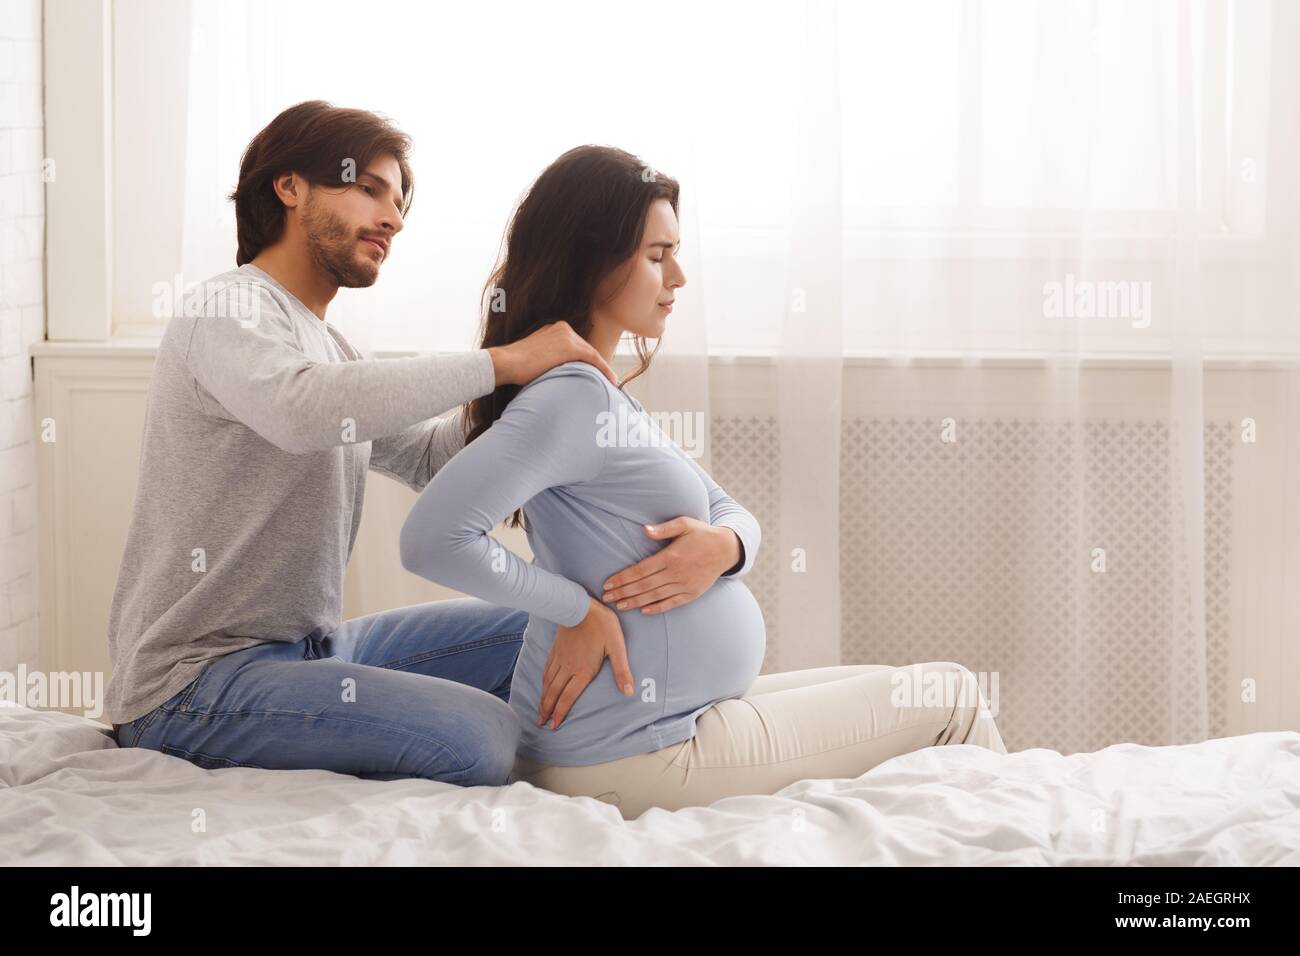 Caring husband massaging shoulders of his pregnant wife Stock Photo